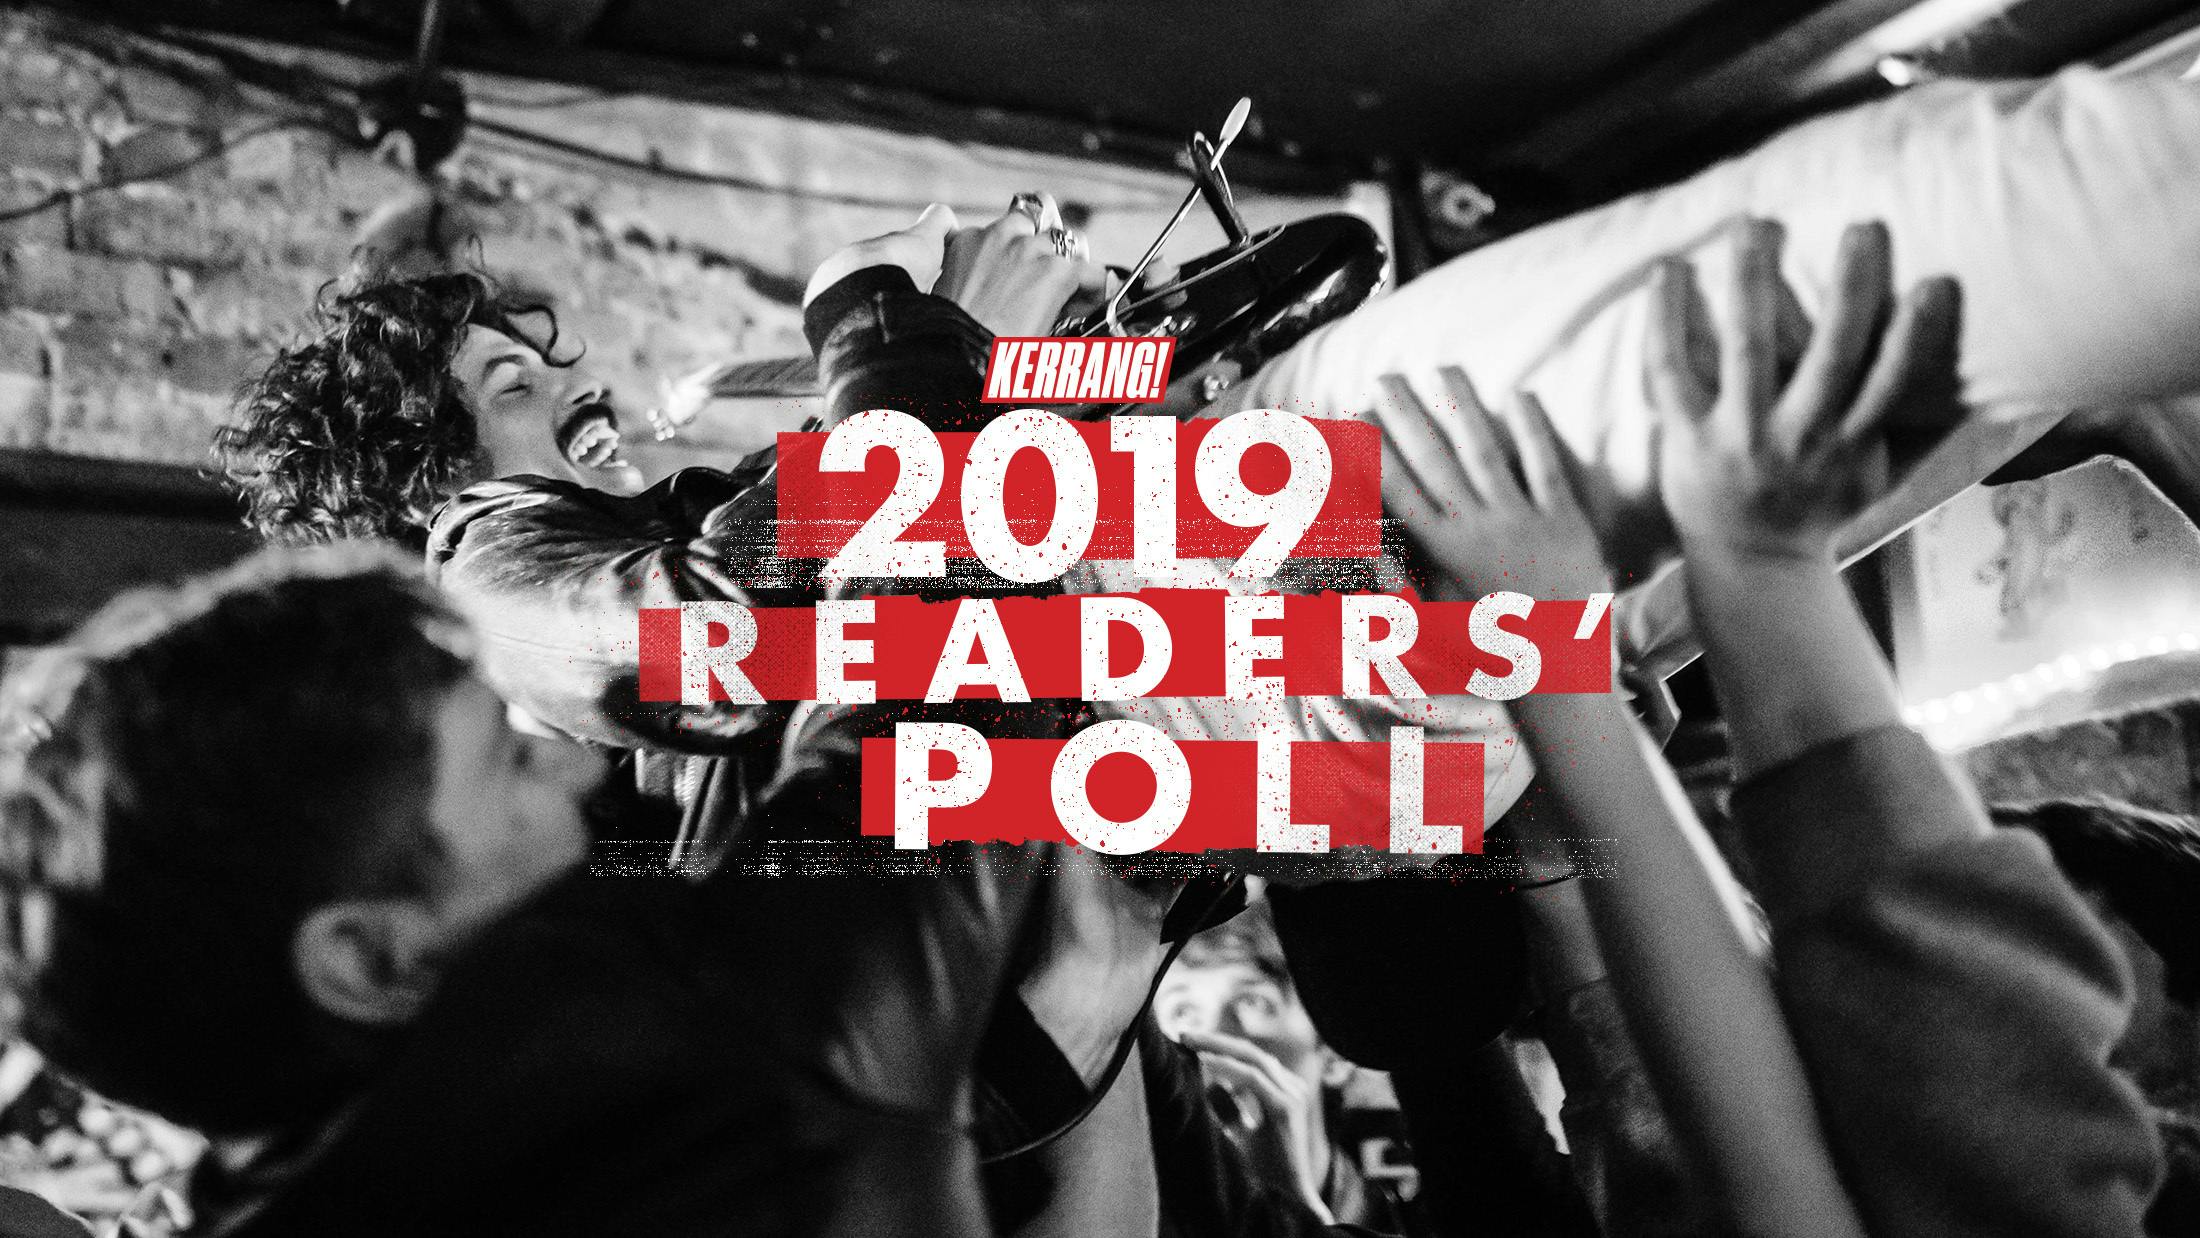 Cast Your Votes In The Kerrang! Readers' Poll 2019